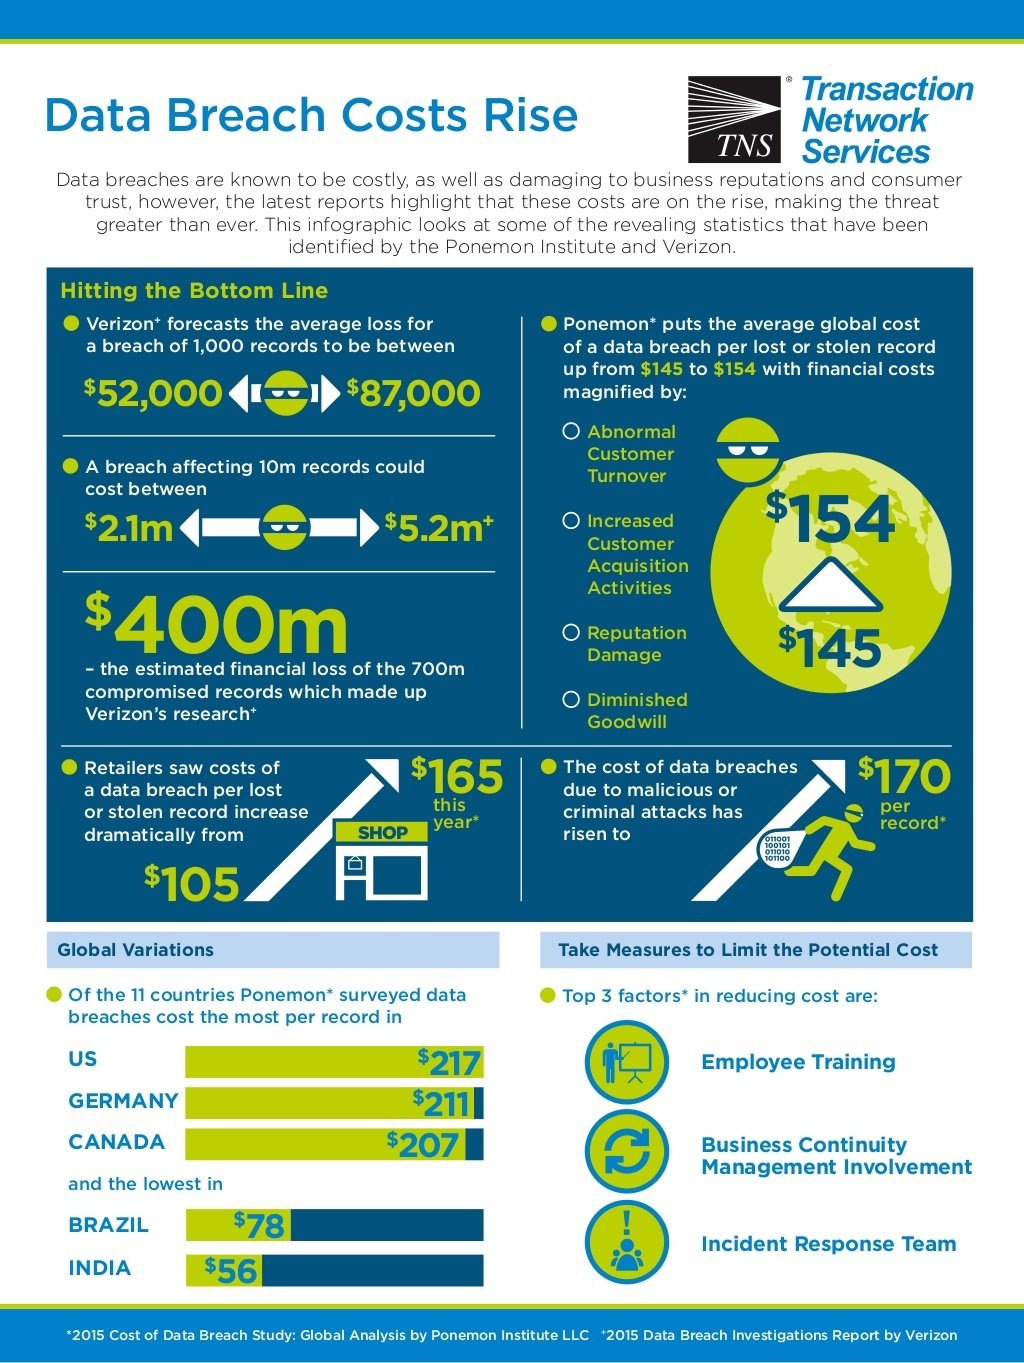 infographic-data-breach-costs-on-the-rise-september-2015-1-1024